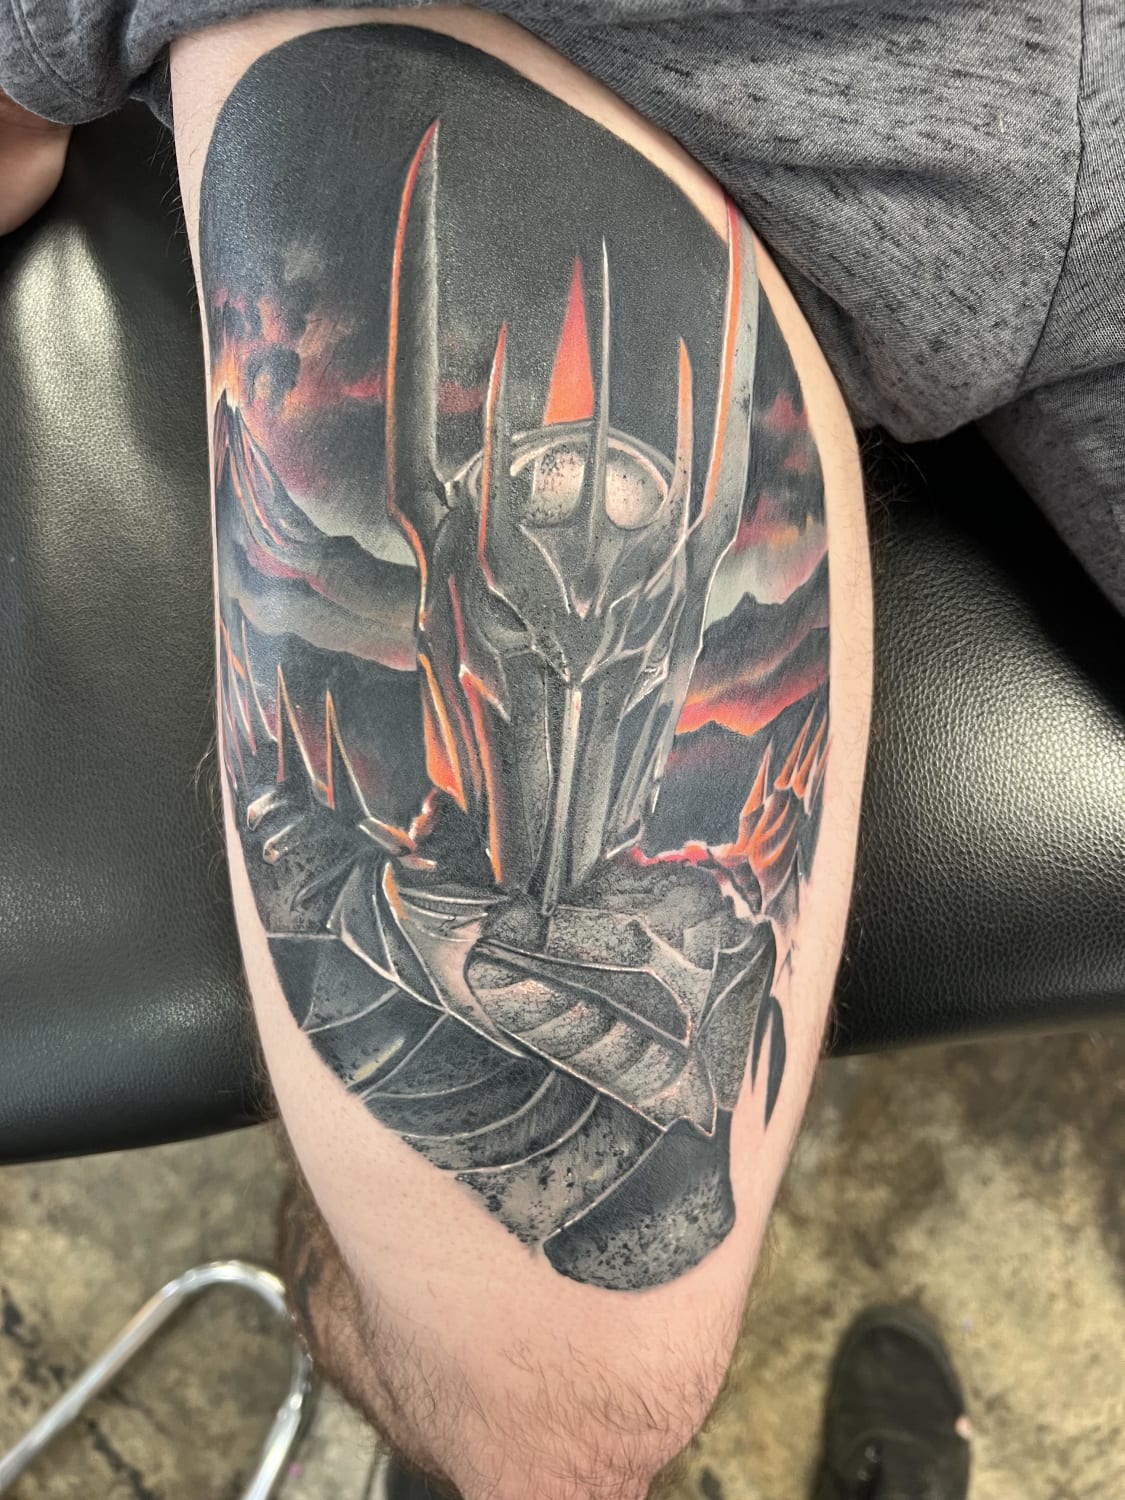 Got my first Lord of the Rings tattoo! Still have one more small session but too excited about it so I had to share. Done by Justin Stewart at Smoking Guns in Beckley, WV